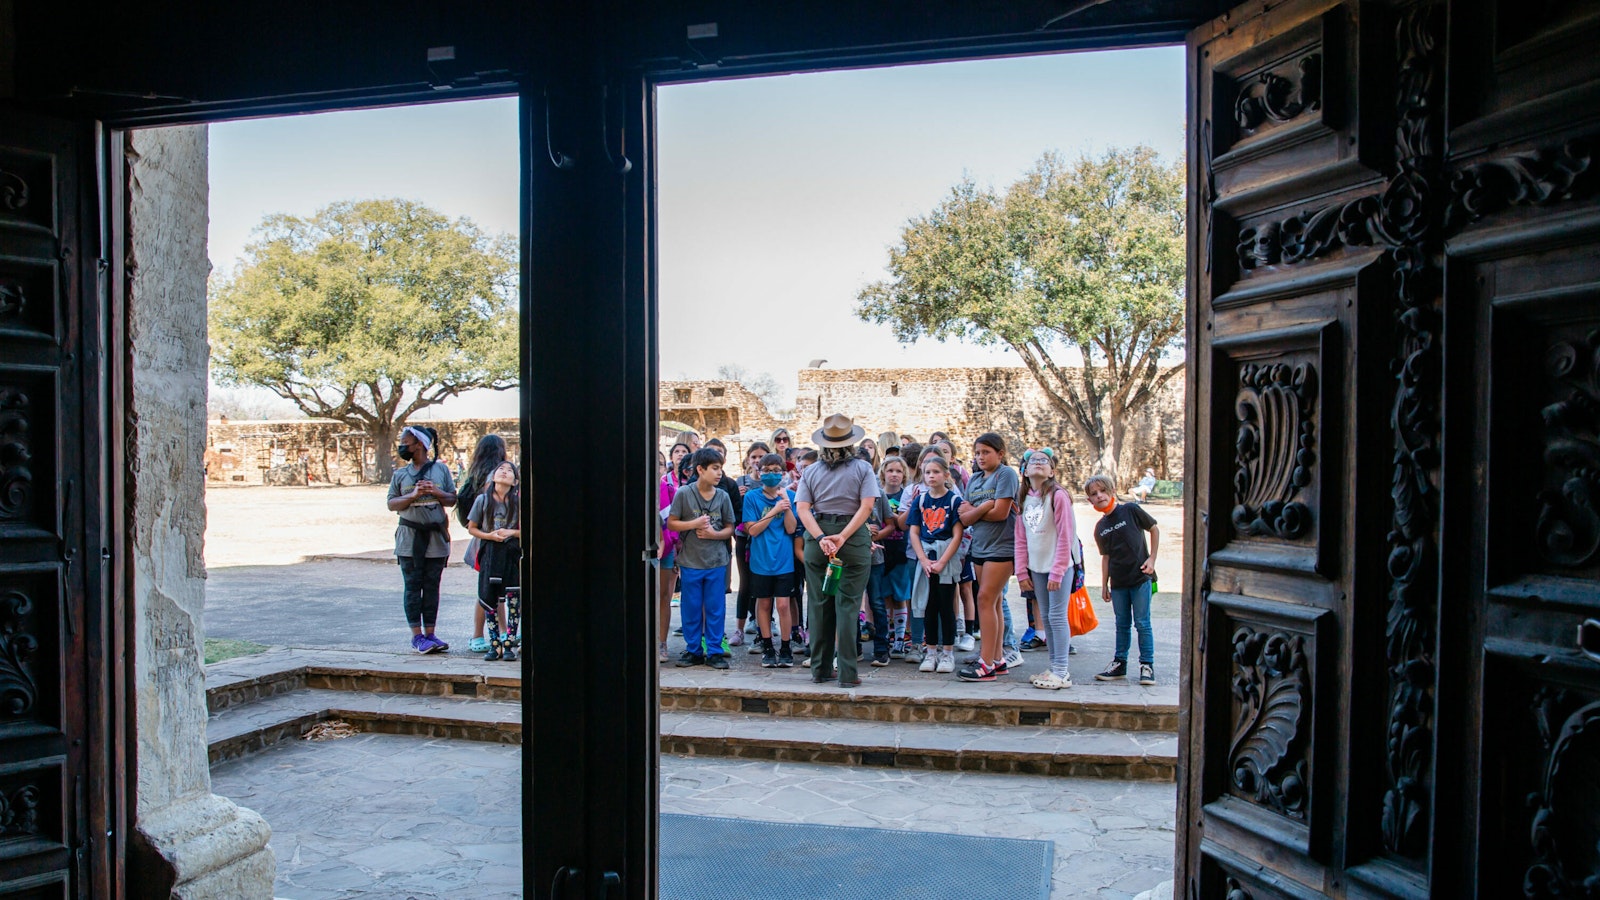 Through a set of historic, carved wooden doors, a group of students and a park ranger standing